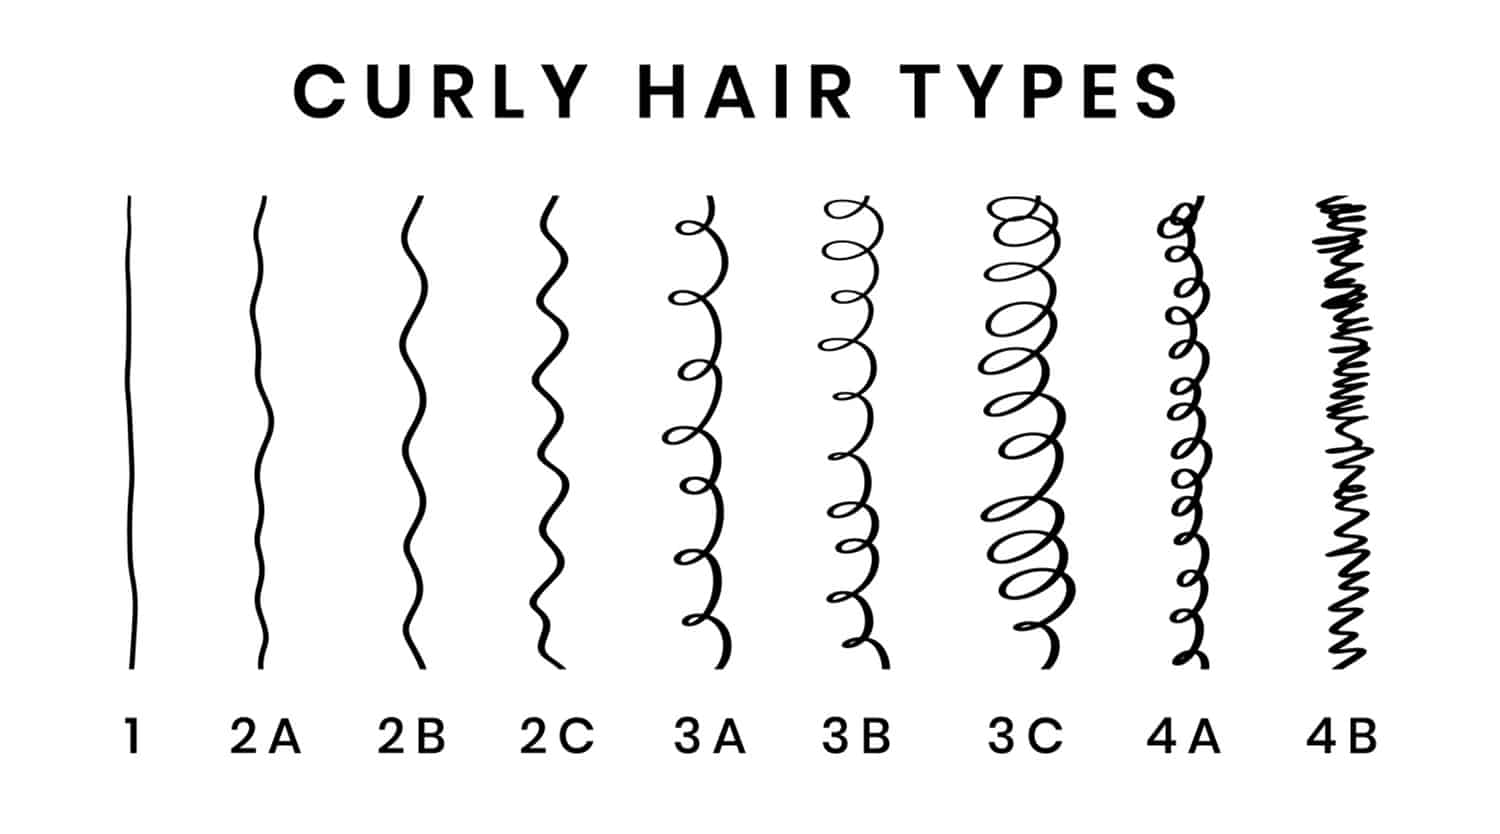 what makes curly hair types